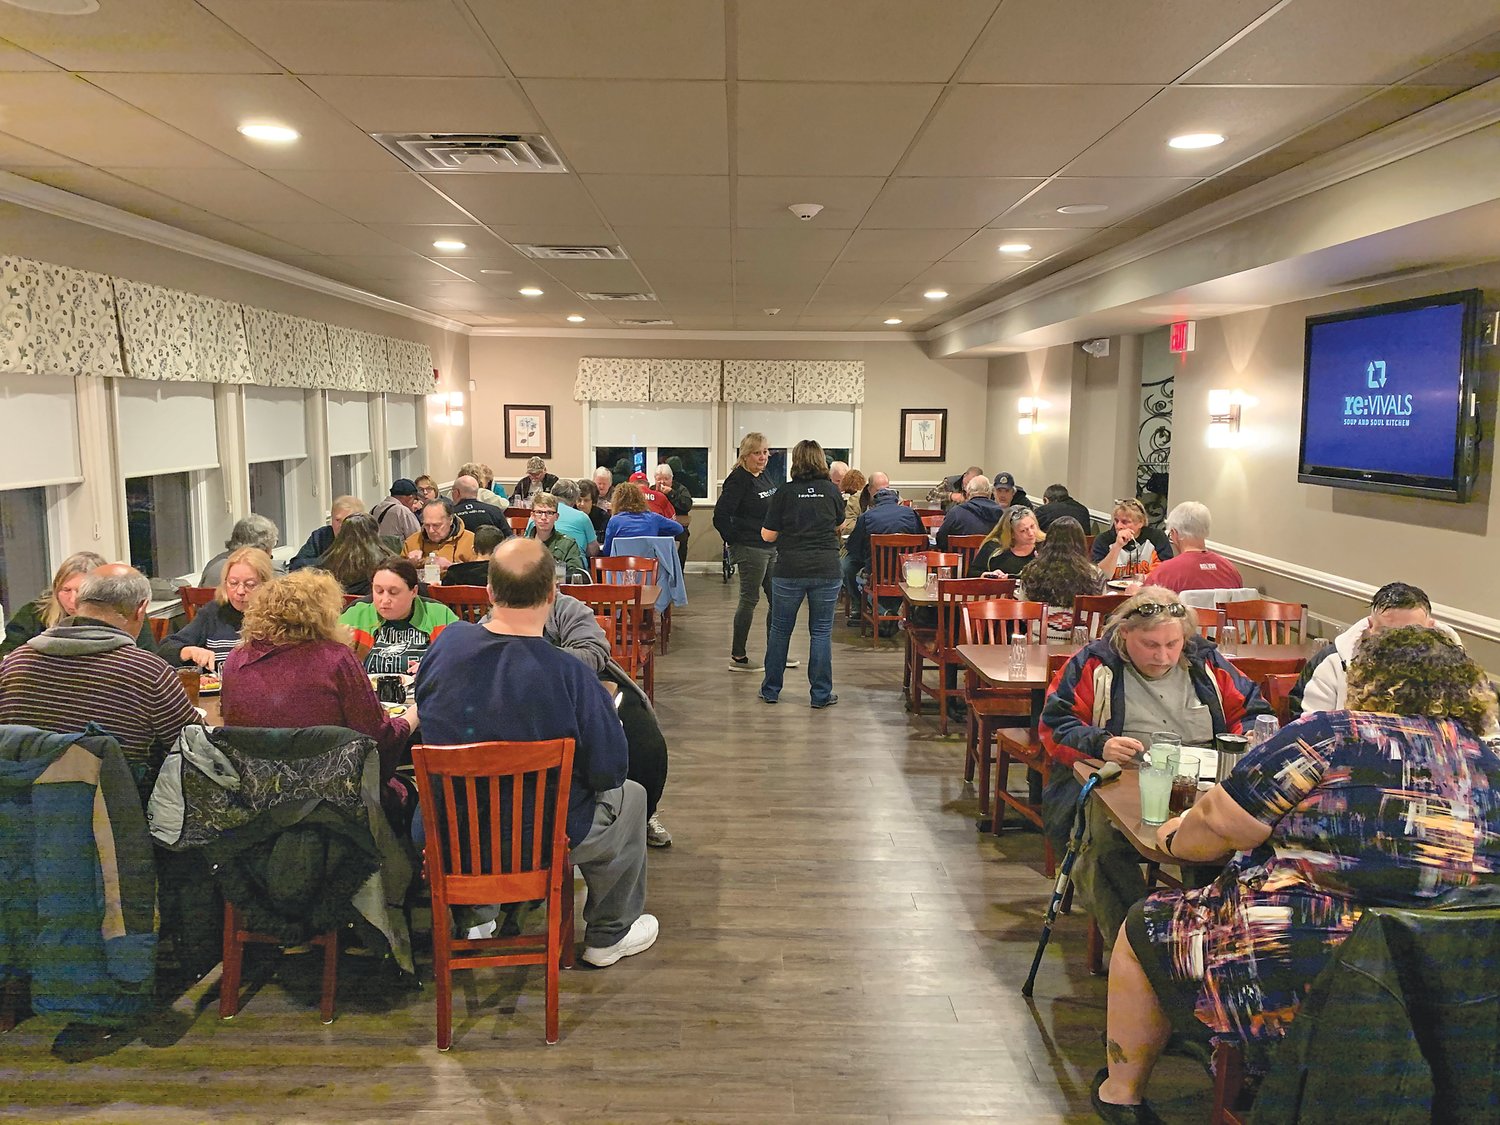 The Soup Kitchen at Revivals Outreach Center is serving two family-style meals free of charge at 5 p.m. and 6:15 p.m. every Tueday through Dec. 17. Photograph courtesy of Adam Mellor.